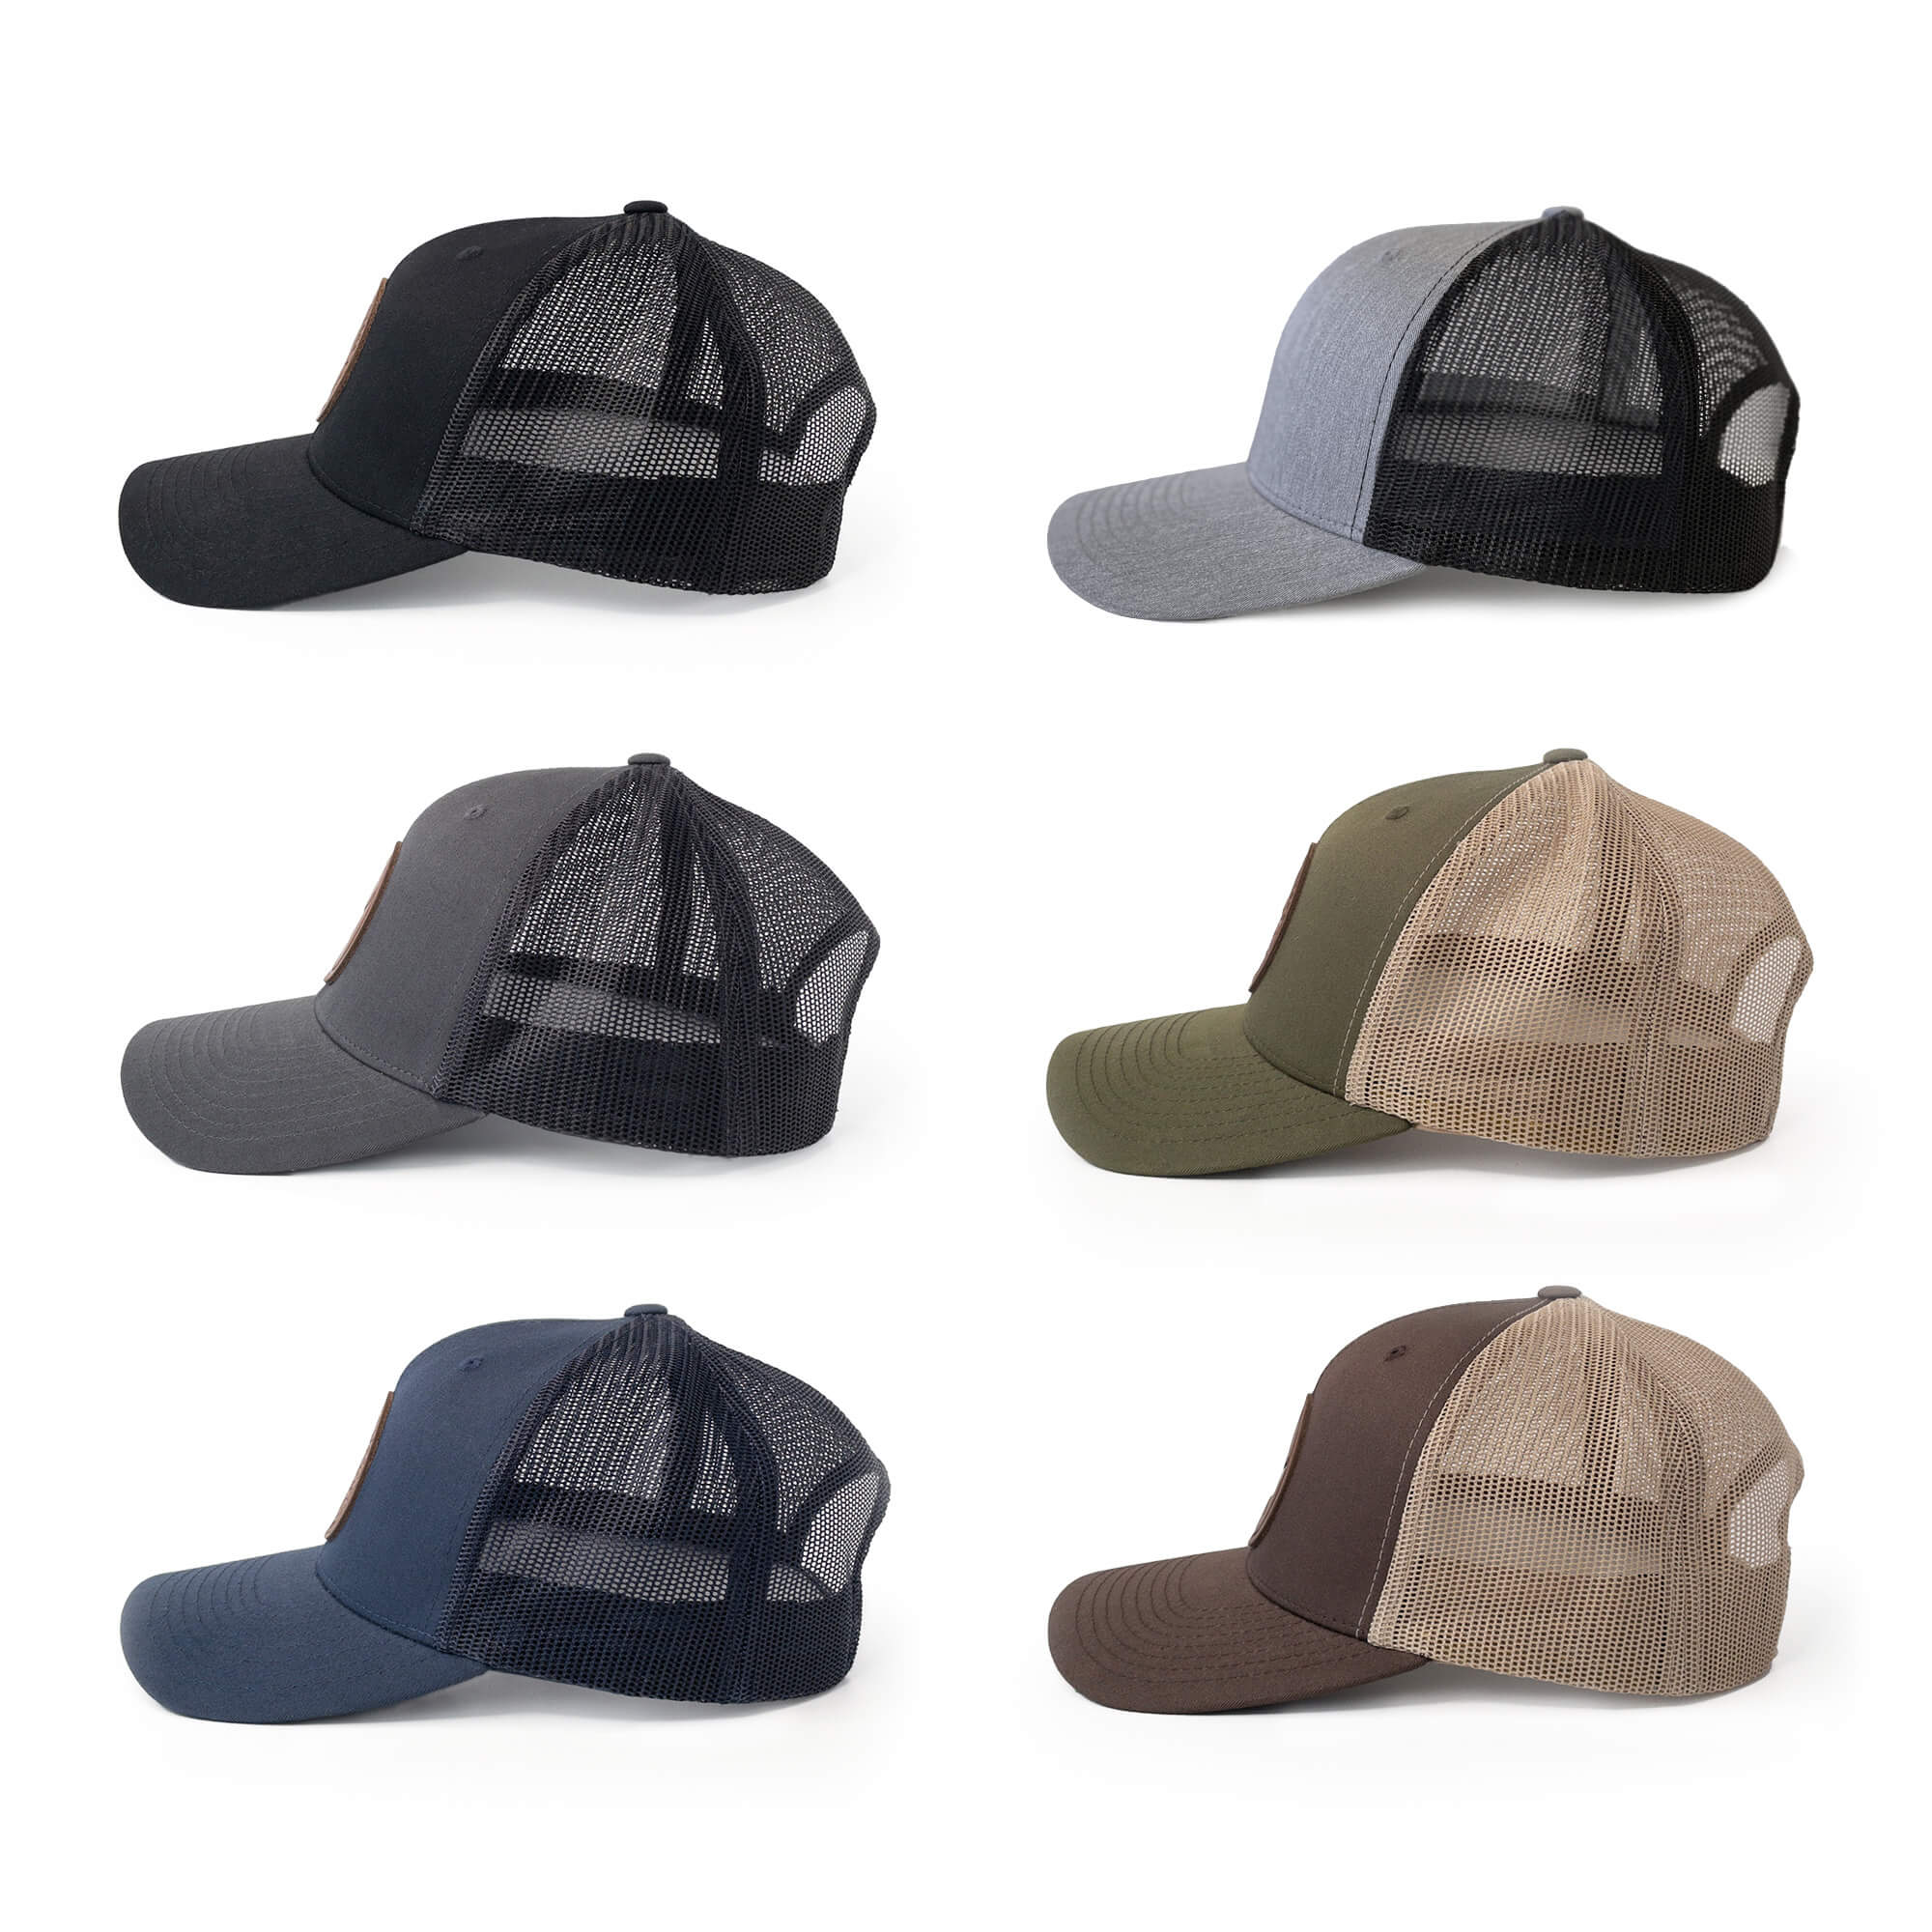 Leather patch trucker hats available in 6 colors | BLACK-007-002, CHARC-007-002, NAVY-007-002, HGREY-007-002, MOSS-007-002, BROWN-007-002